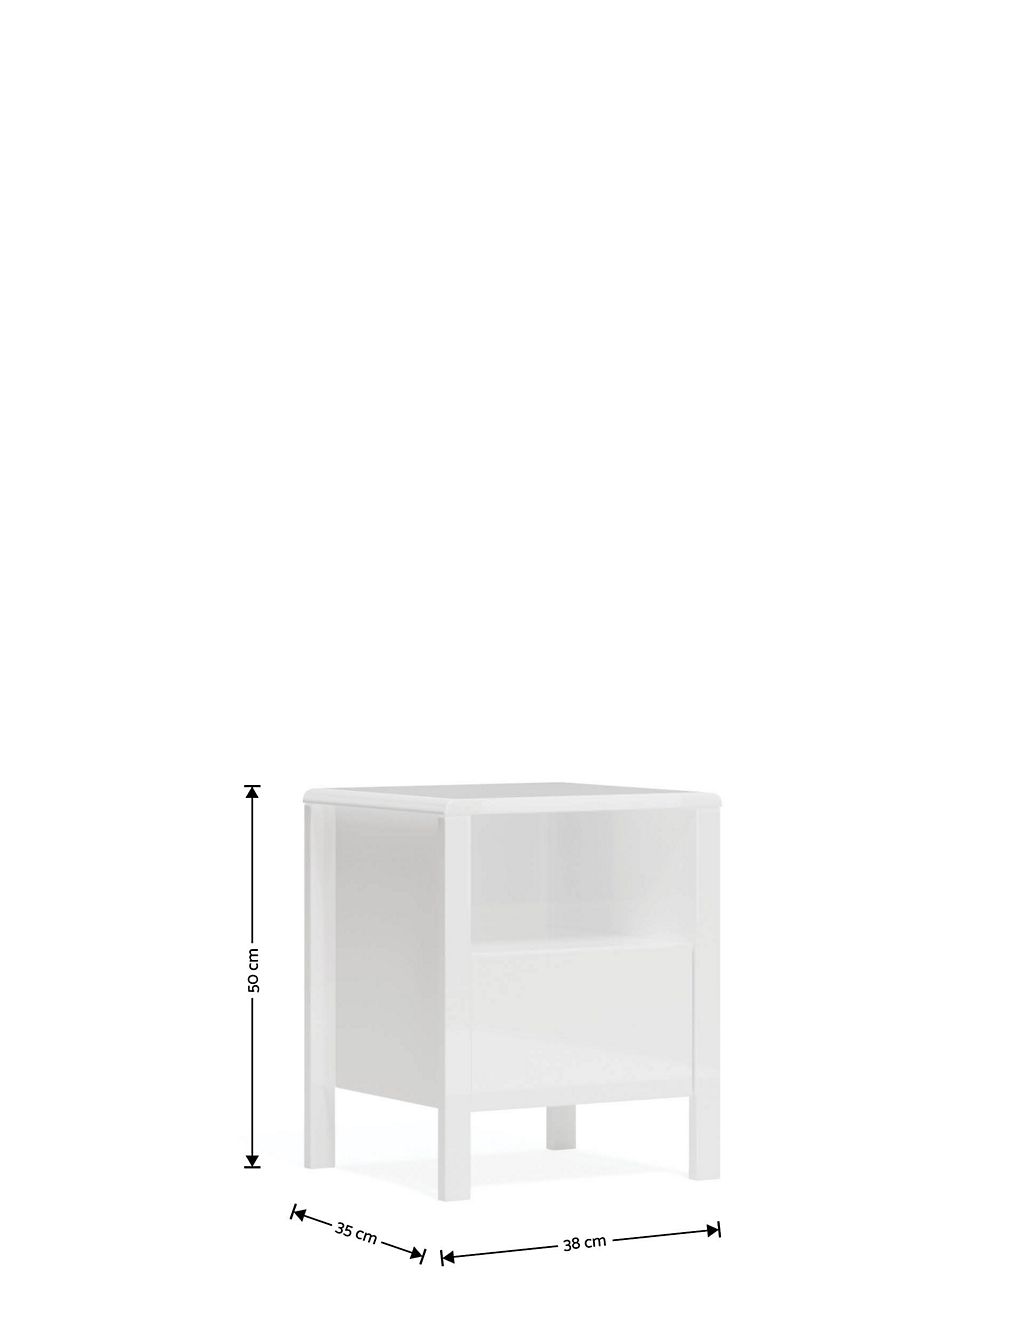 Loxton Gloss 1 Drawer Slim Bedside Table 5 of 8